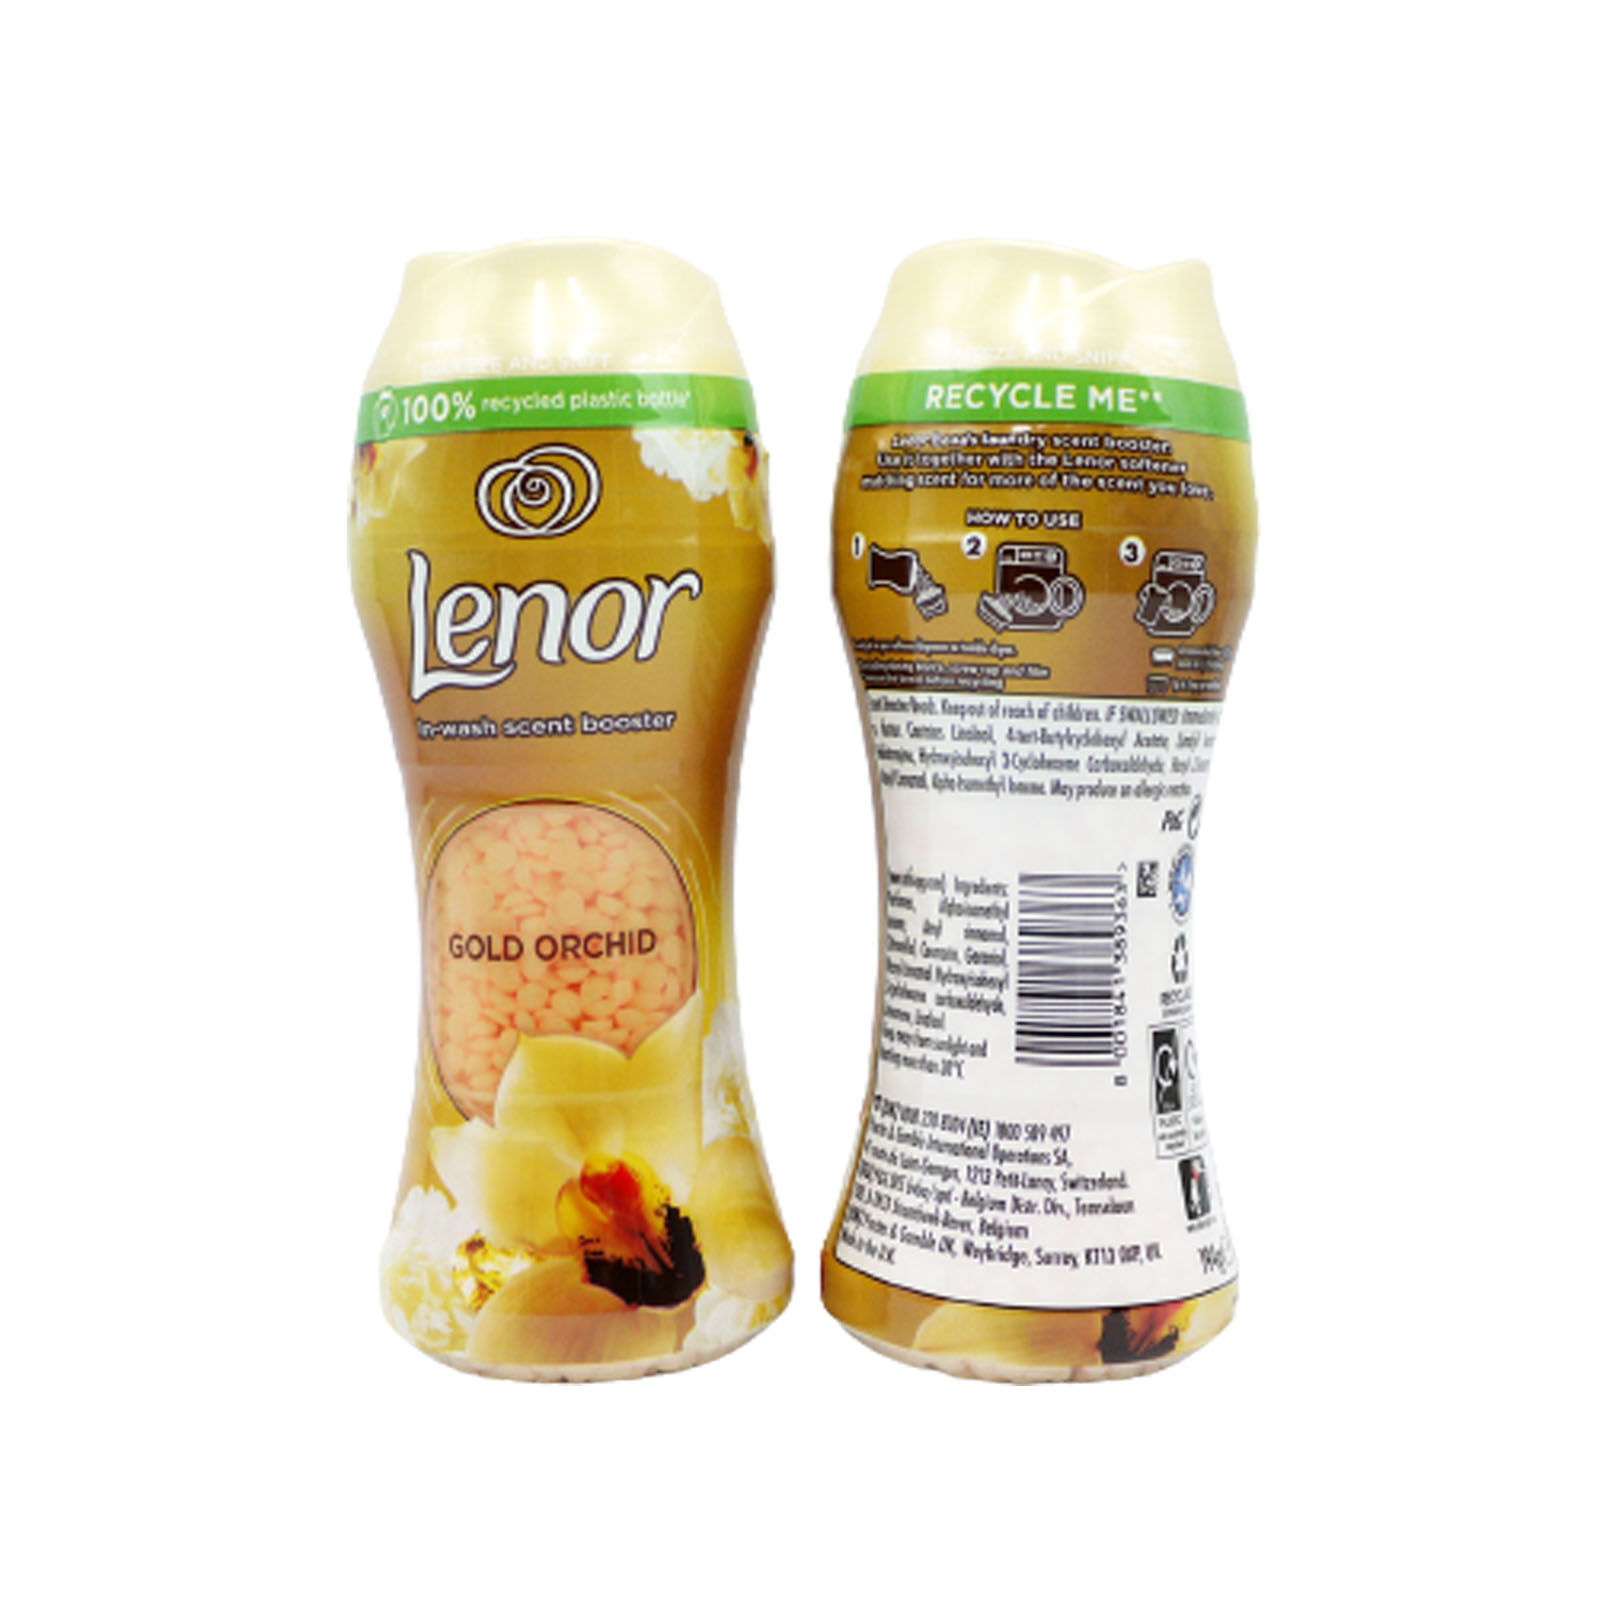 Lenor In Wash Sent Booster Gold Orchid